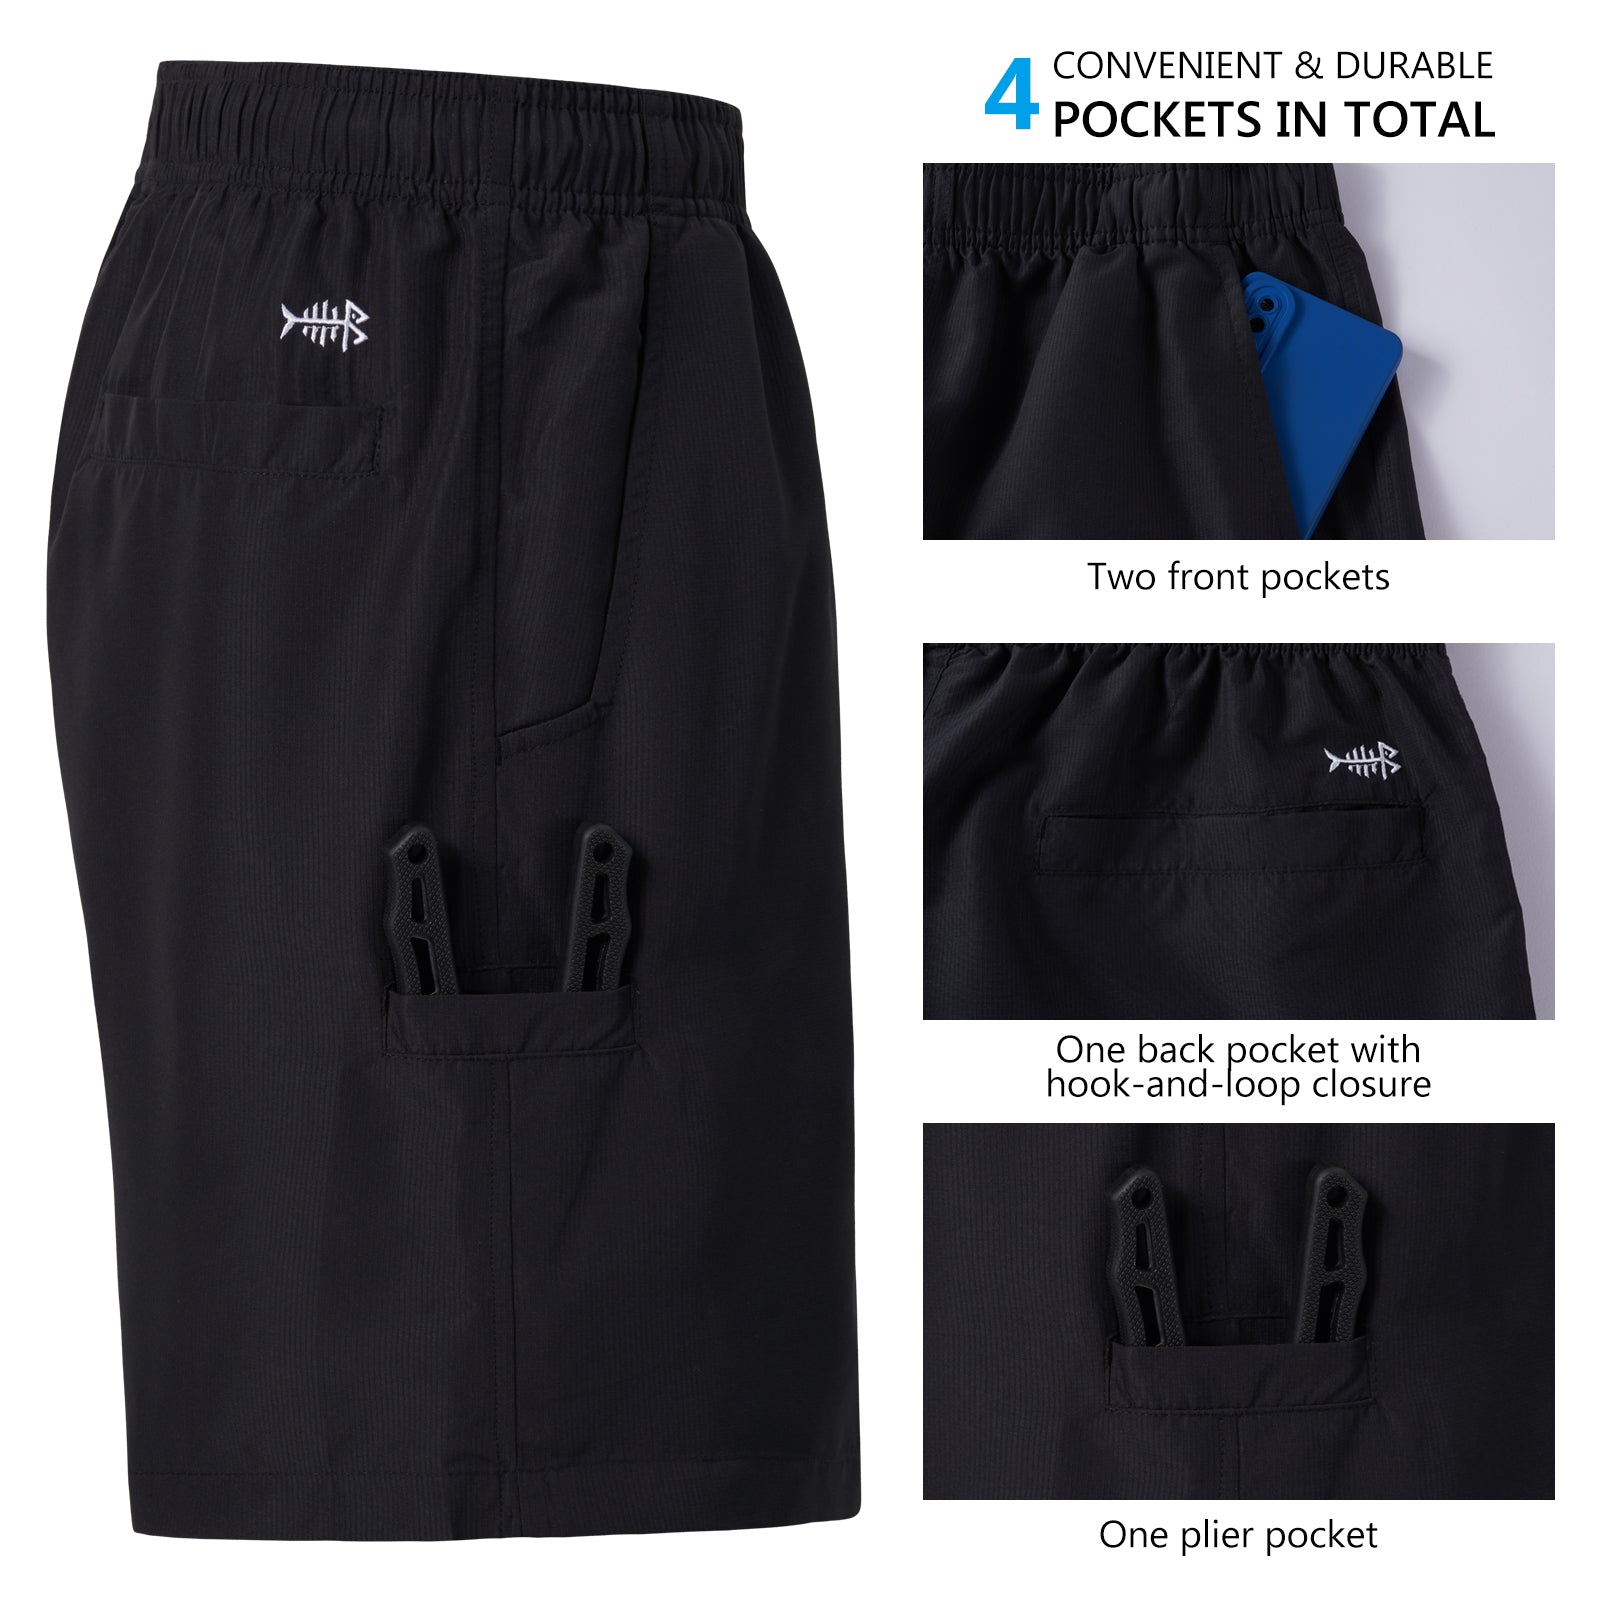 Men's 8in Quick Dry UPF 50+ Water Shorts FP04M